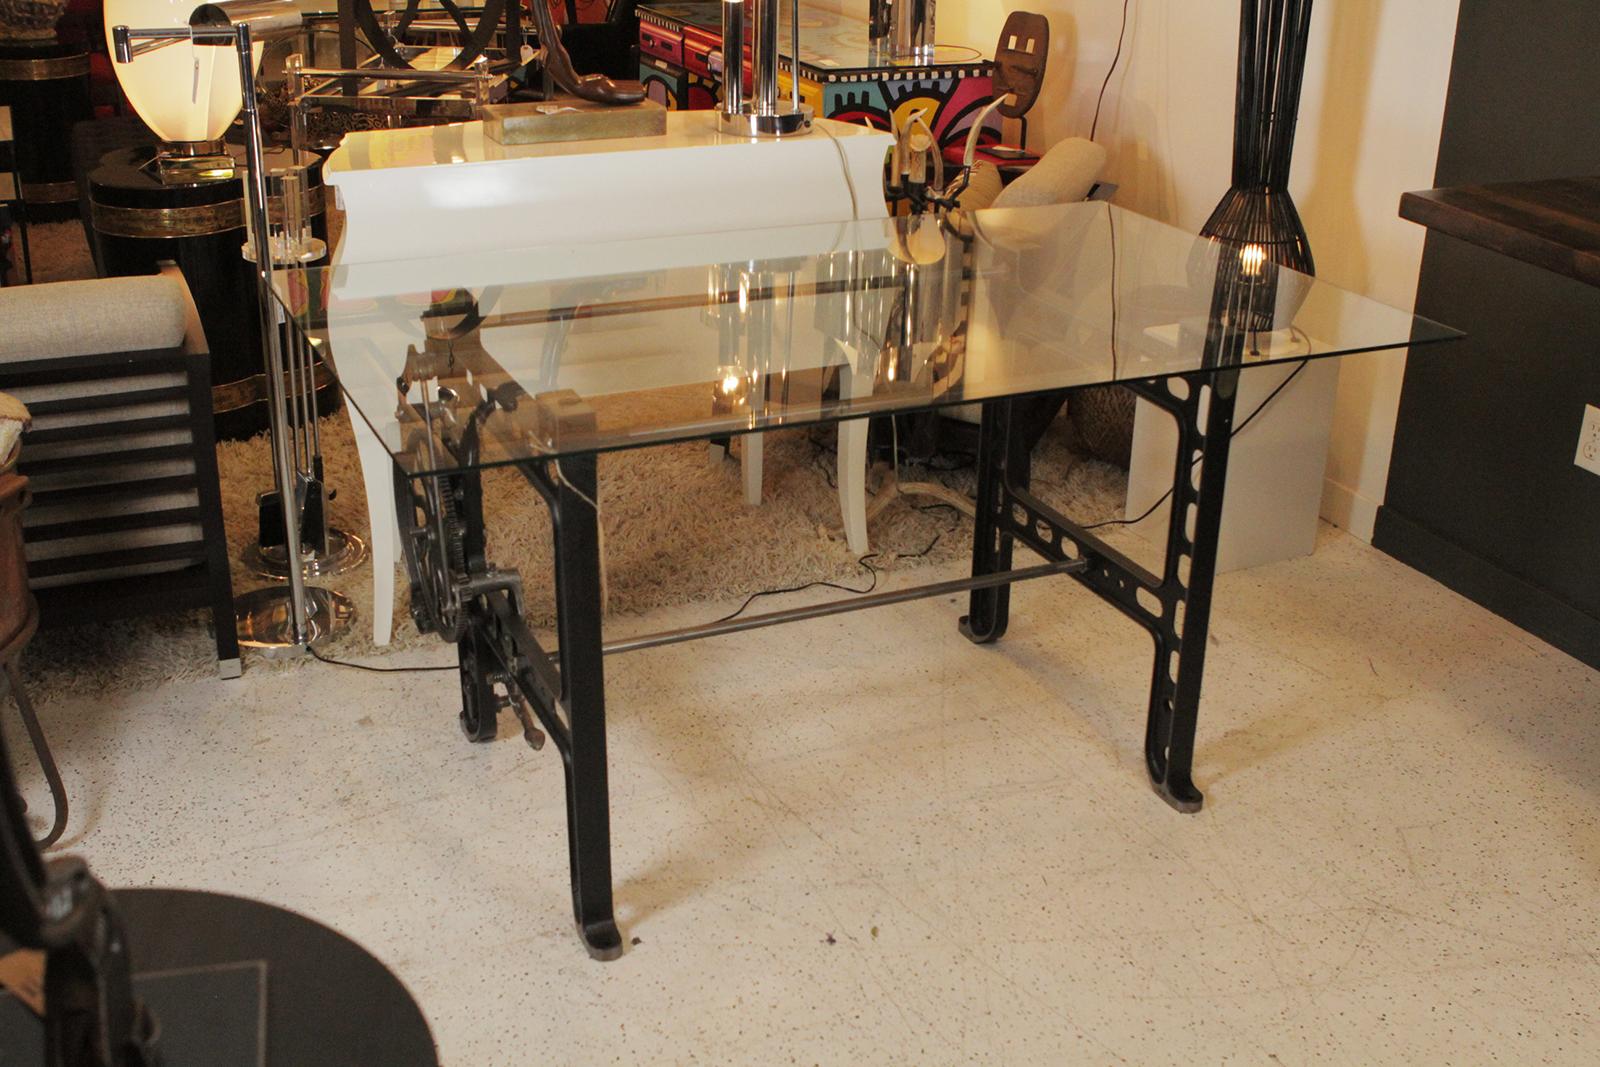 Antique gear base redesigned now as a glass top table, was a work station in a knitting mill
Dimensions: 36” D X 59” W X 29.5” H.